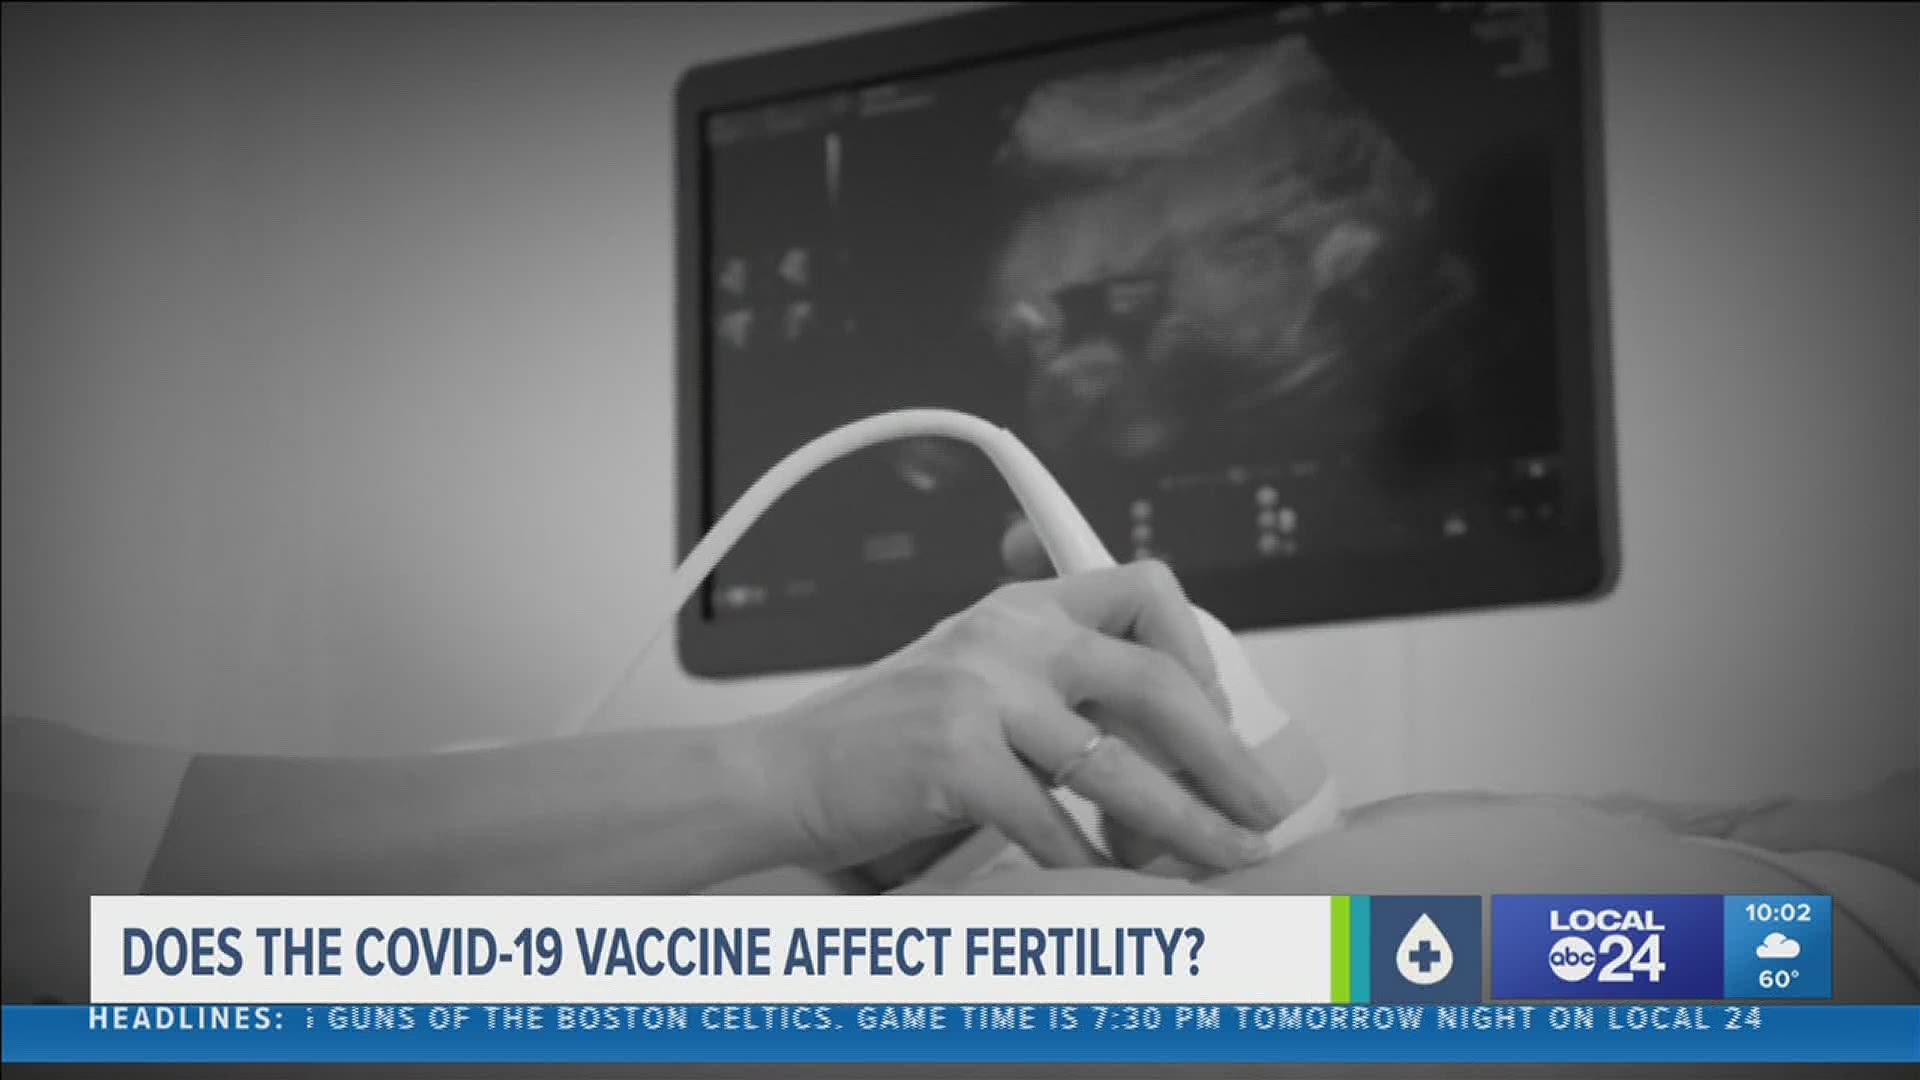 “44,000 V-Safe participants indicated they were pregnant when they got their COVID vaccine or they got pregnant afterwards,” said Dr. William Kutteh.